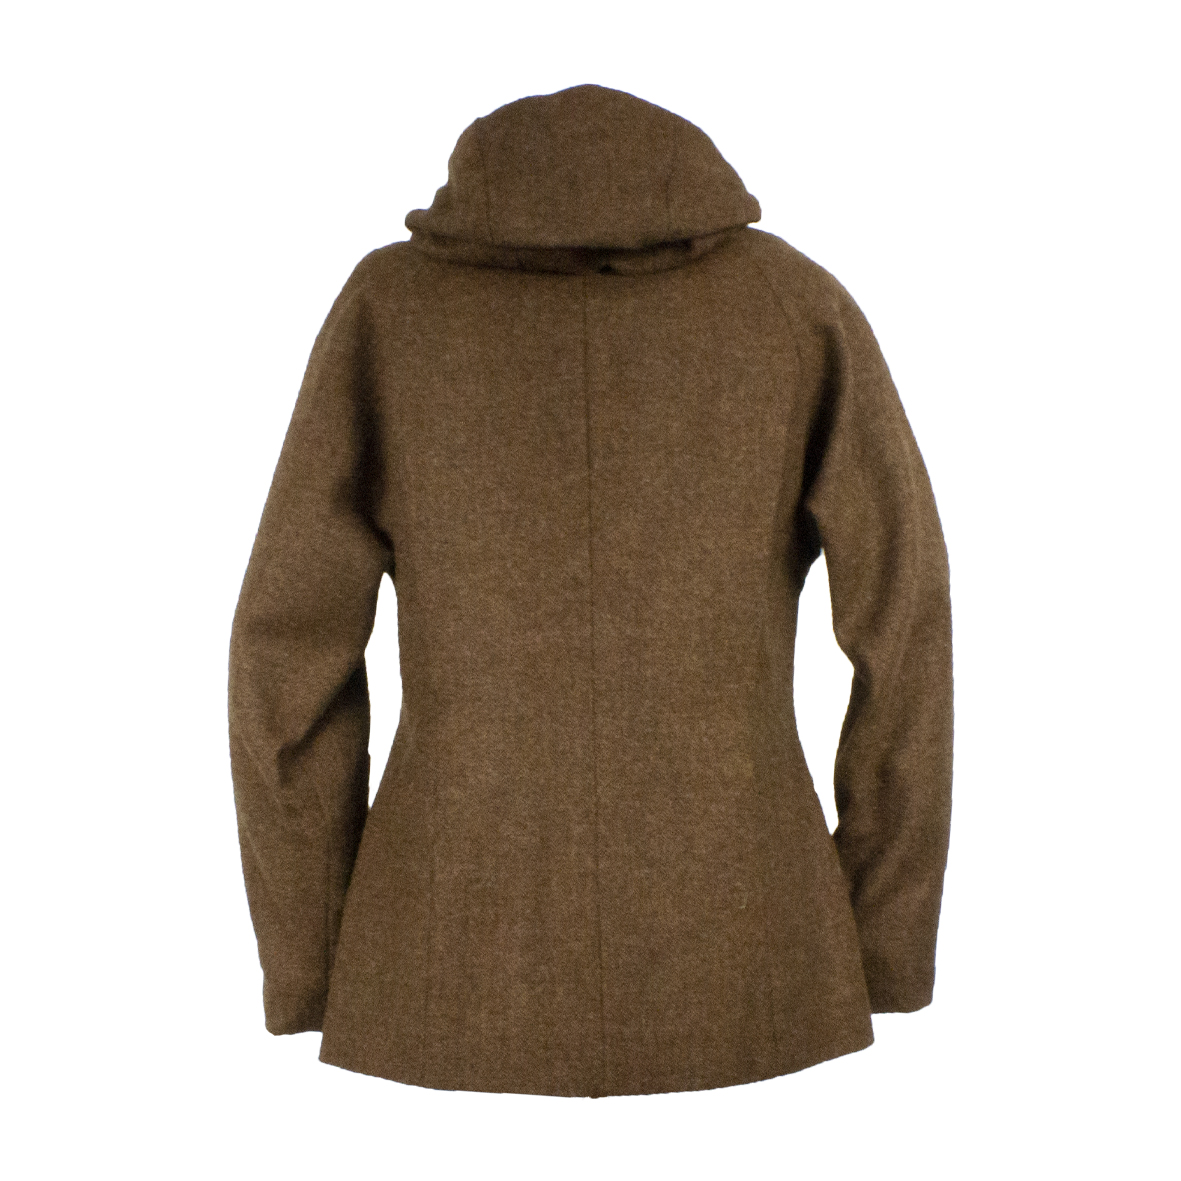 Amber Jacket (Brown/Brown) by Olivia Tullett® - 100% British Made